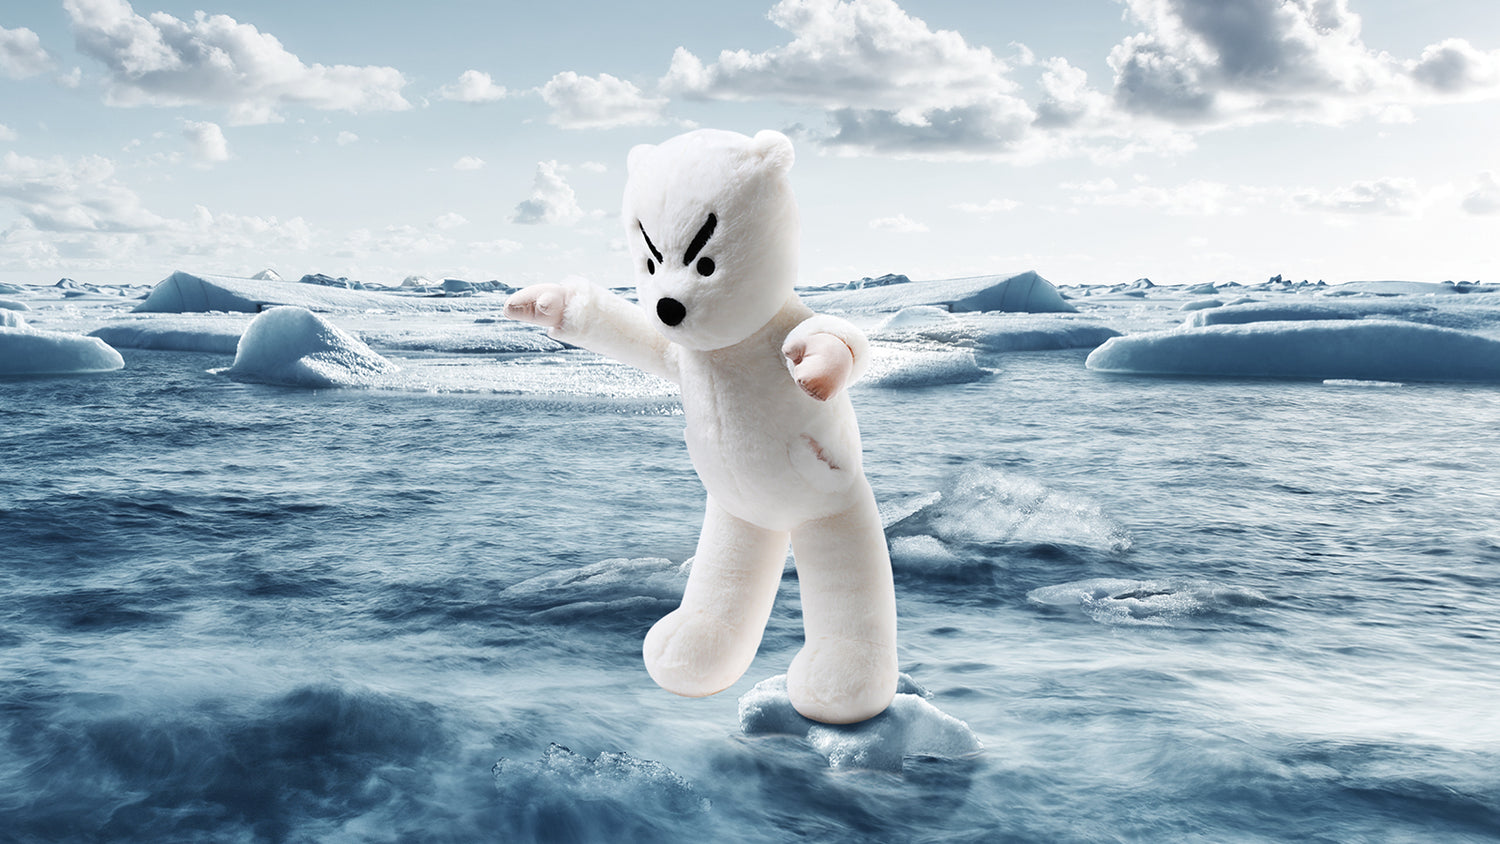 This series of plush toys is to teach everyone the importance of protecting the environment